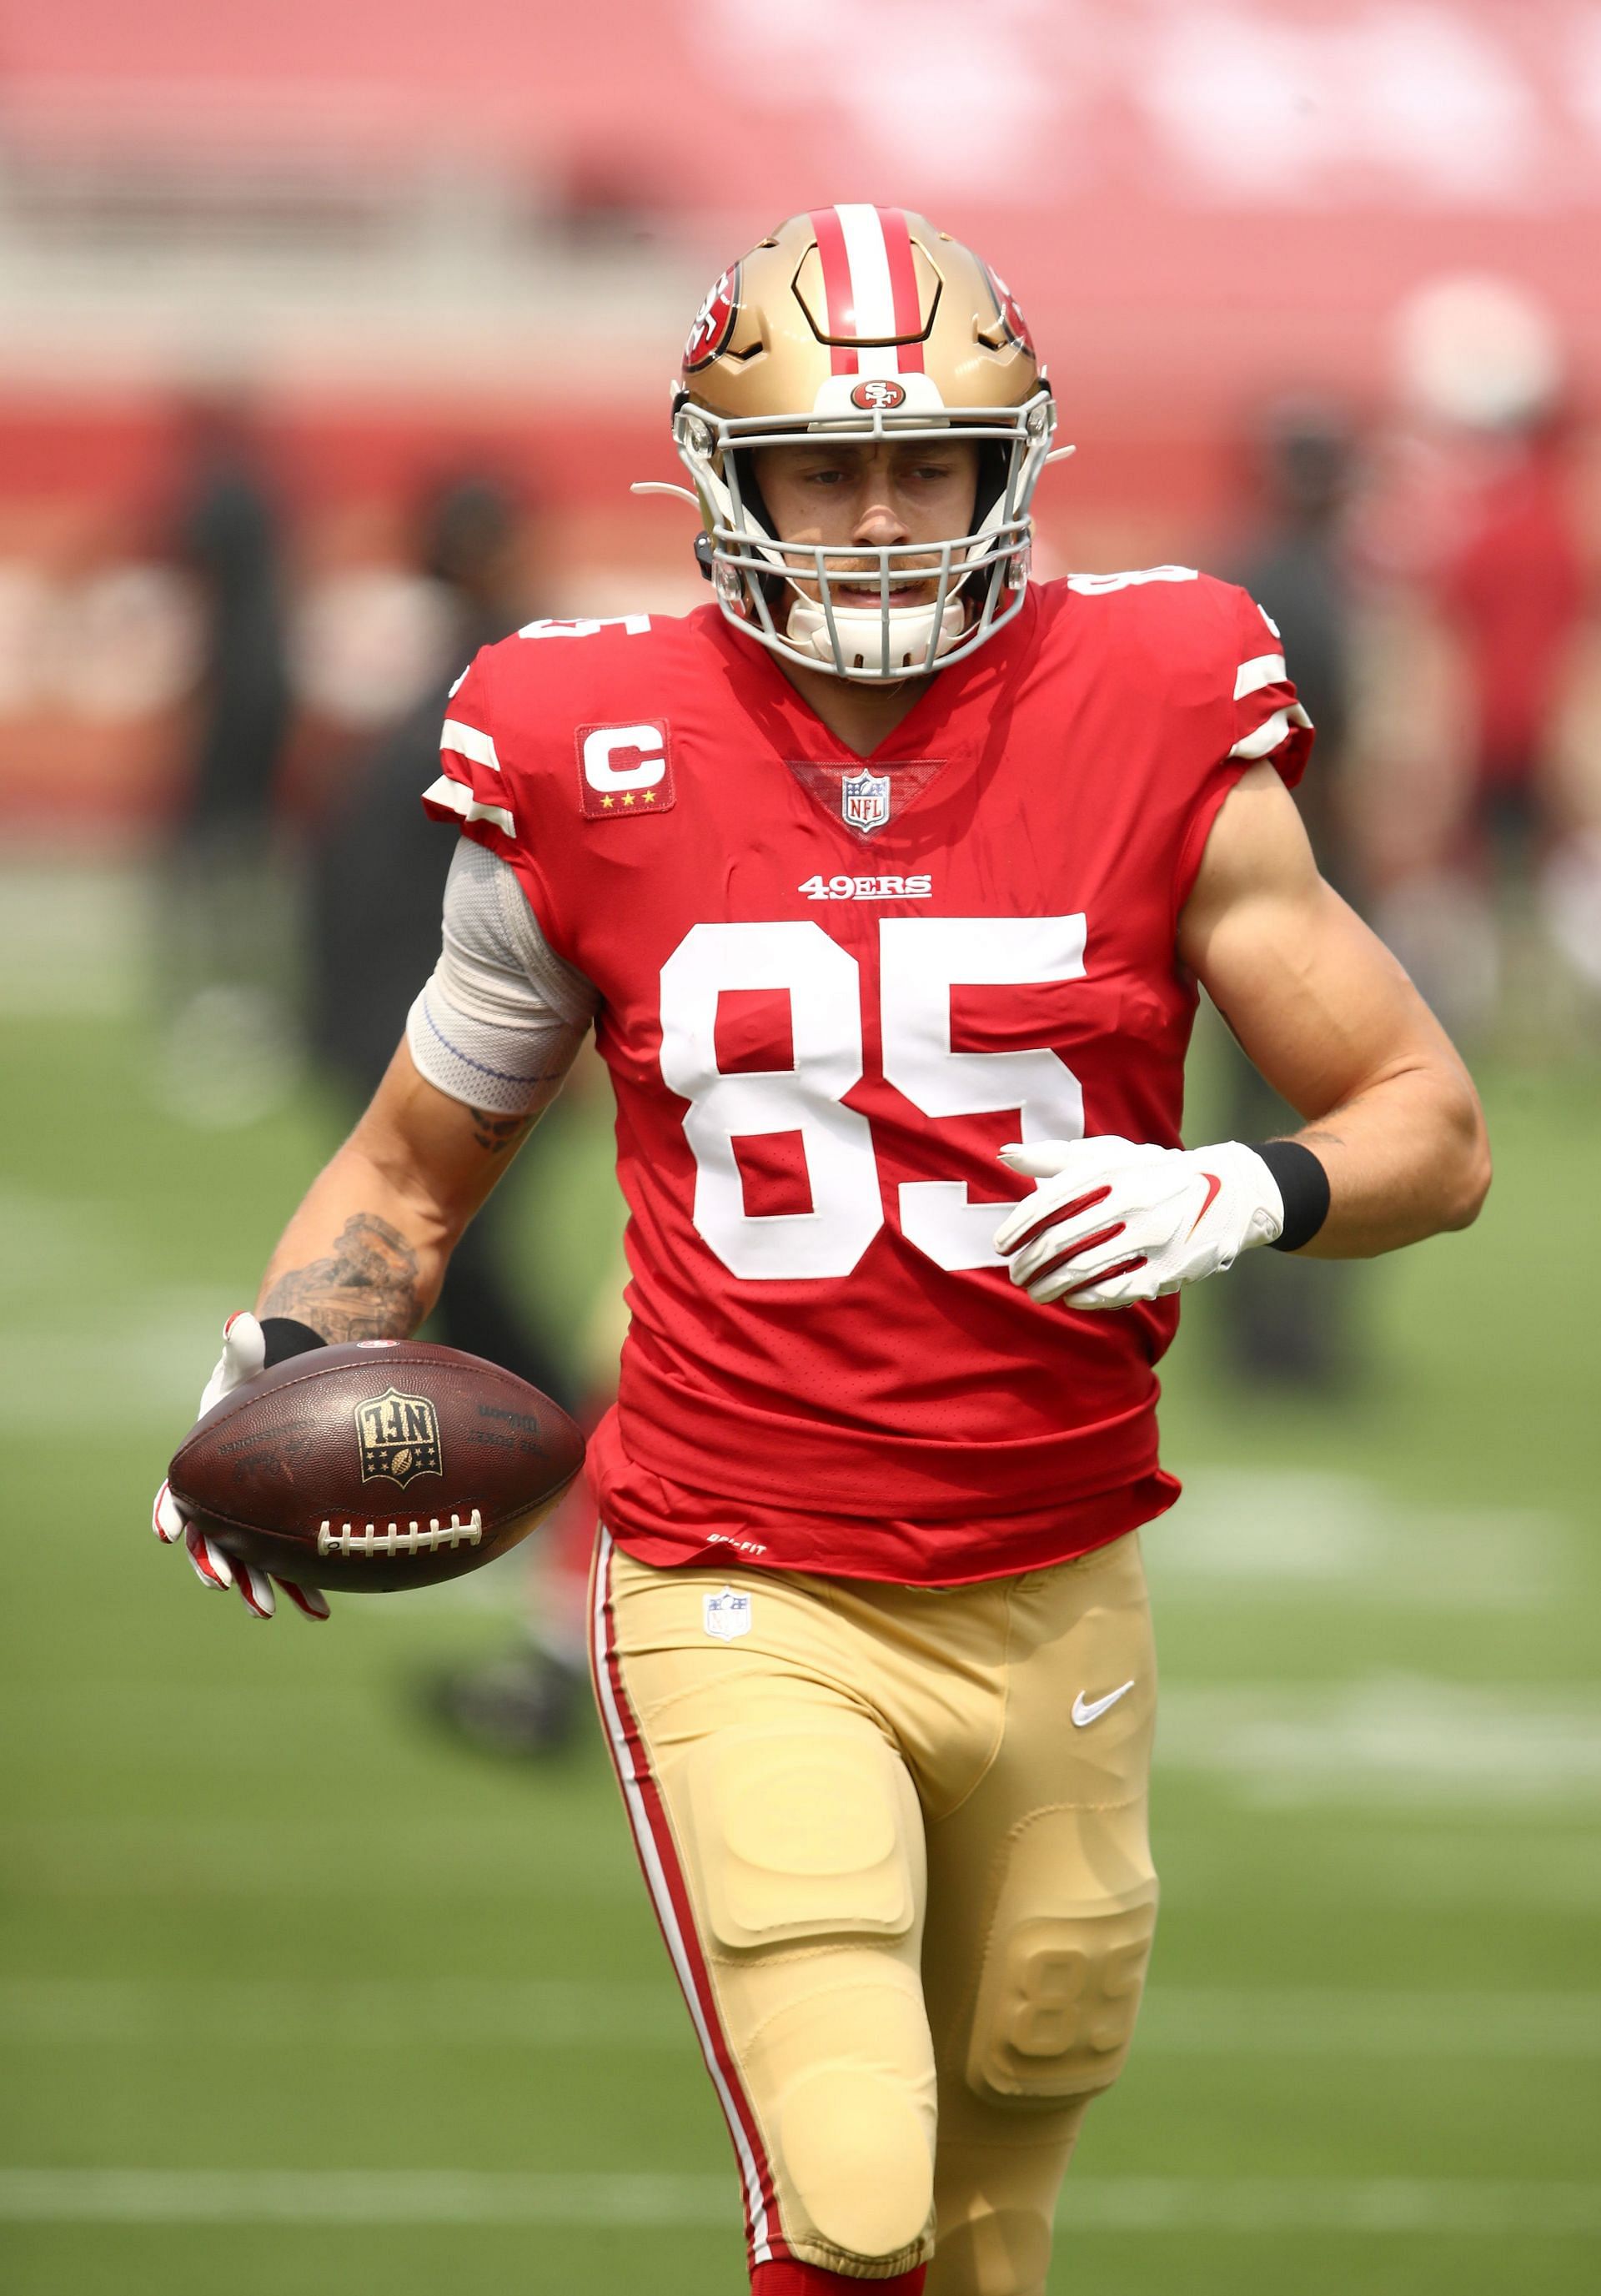 Kittle on the field for the San Francisco 49ers